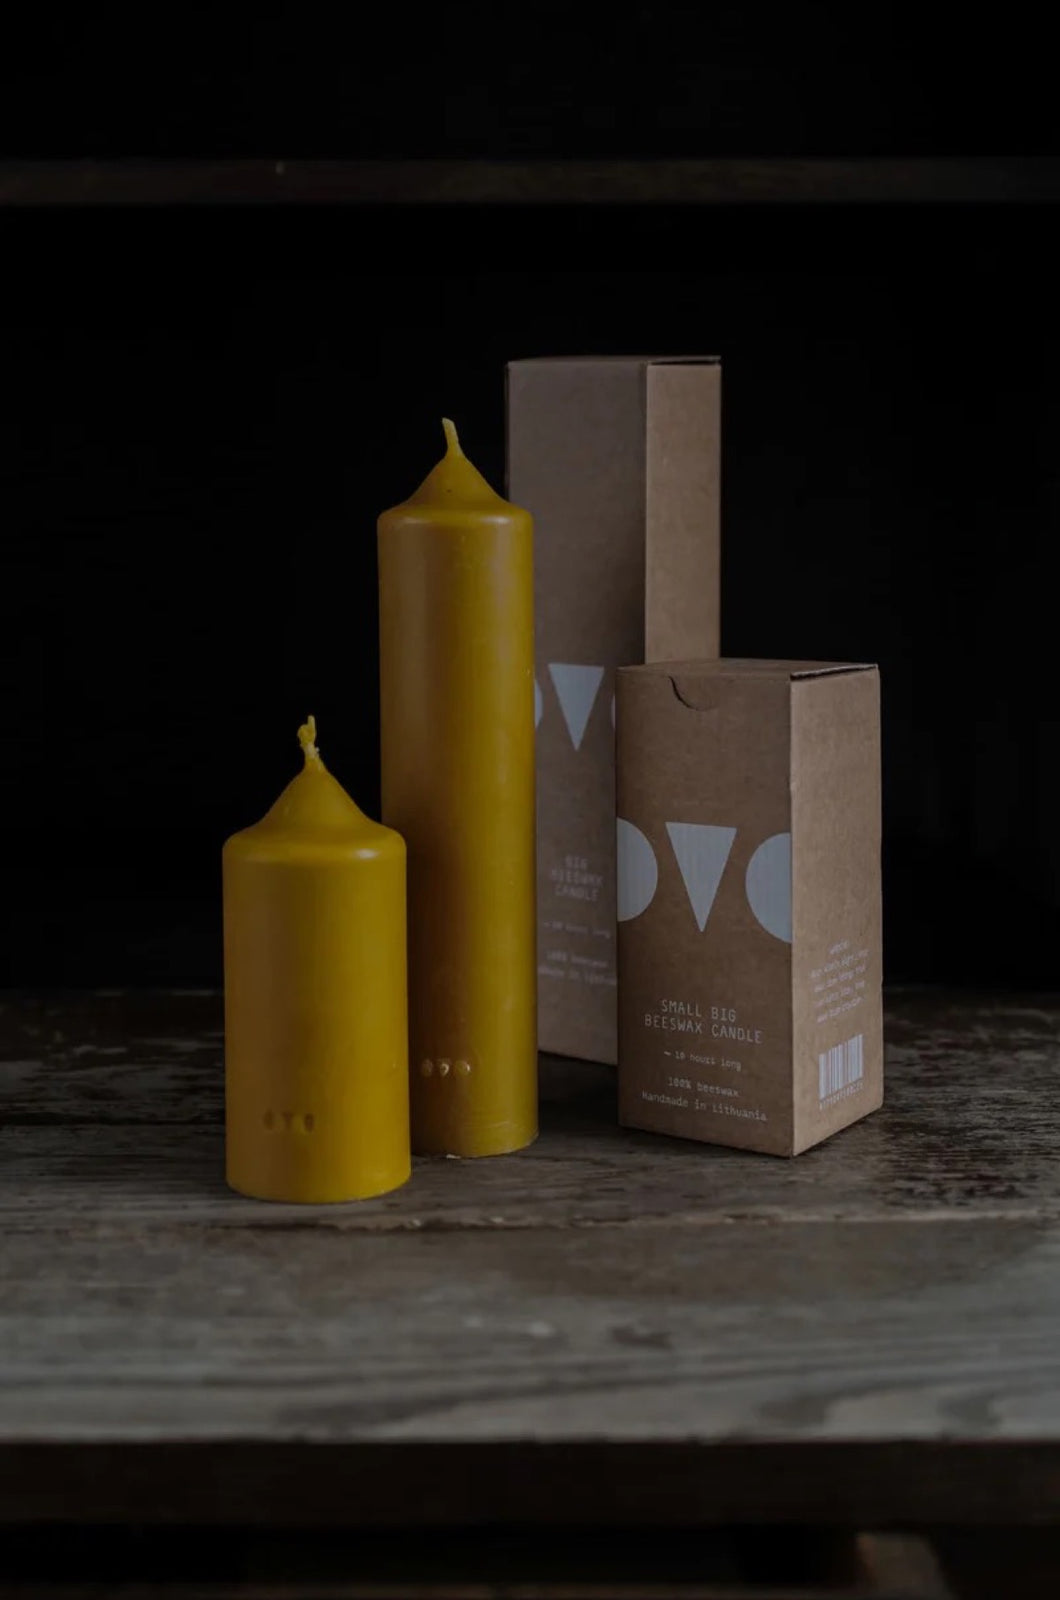 Two mustard colored candles sit unlit on wooden table next to cardboard boxes